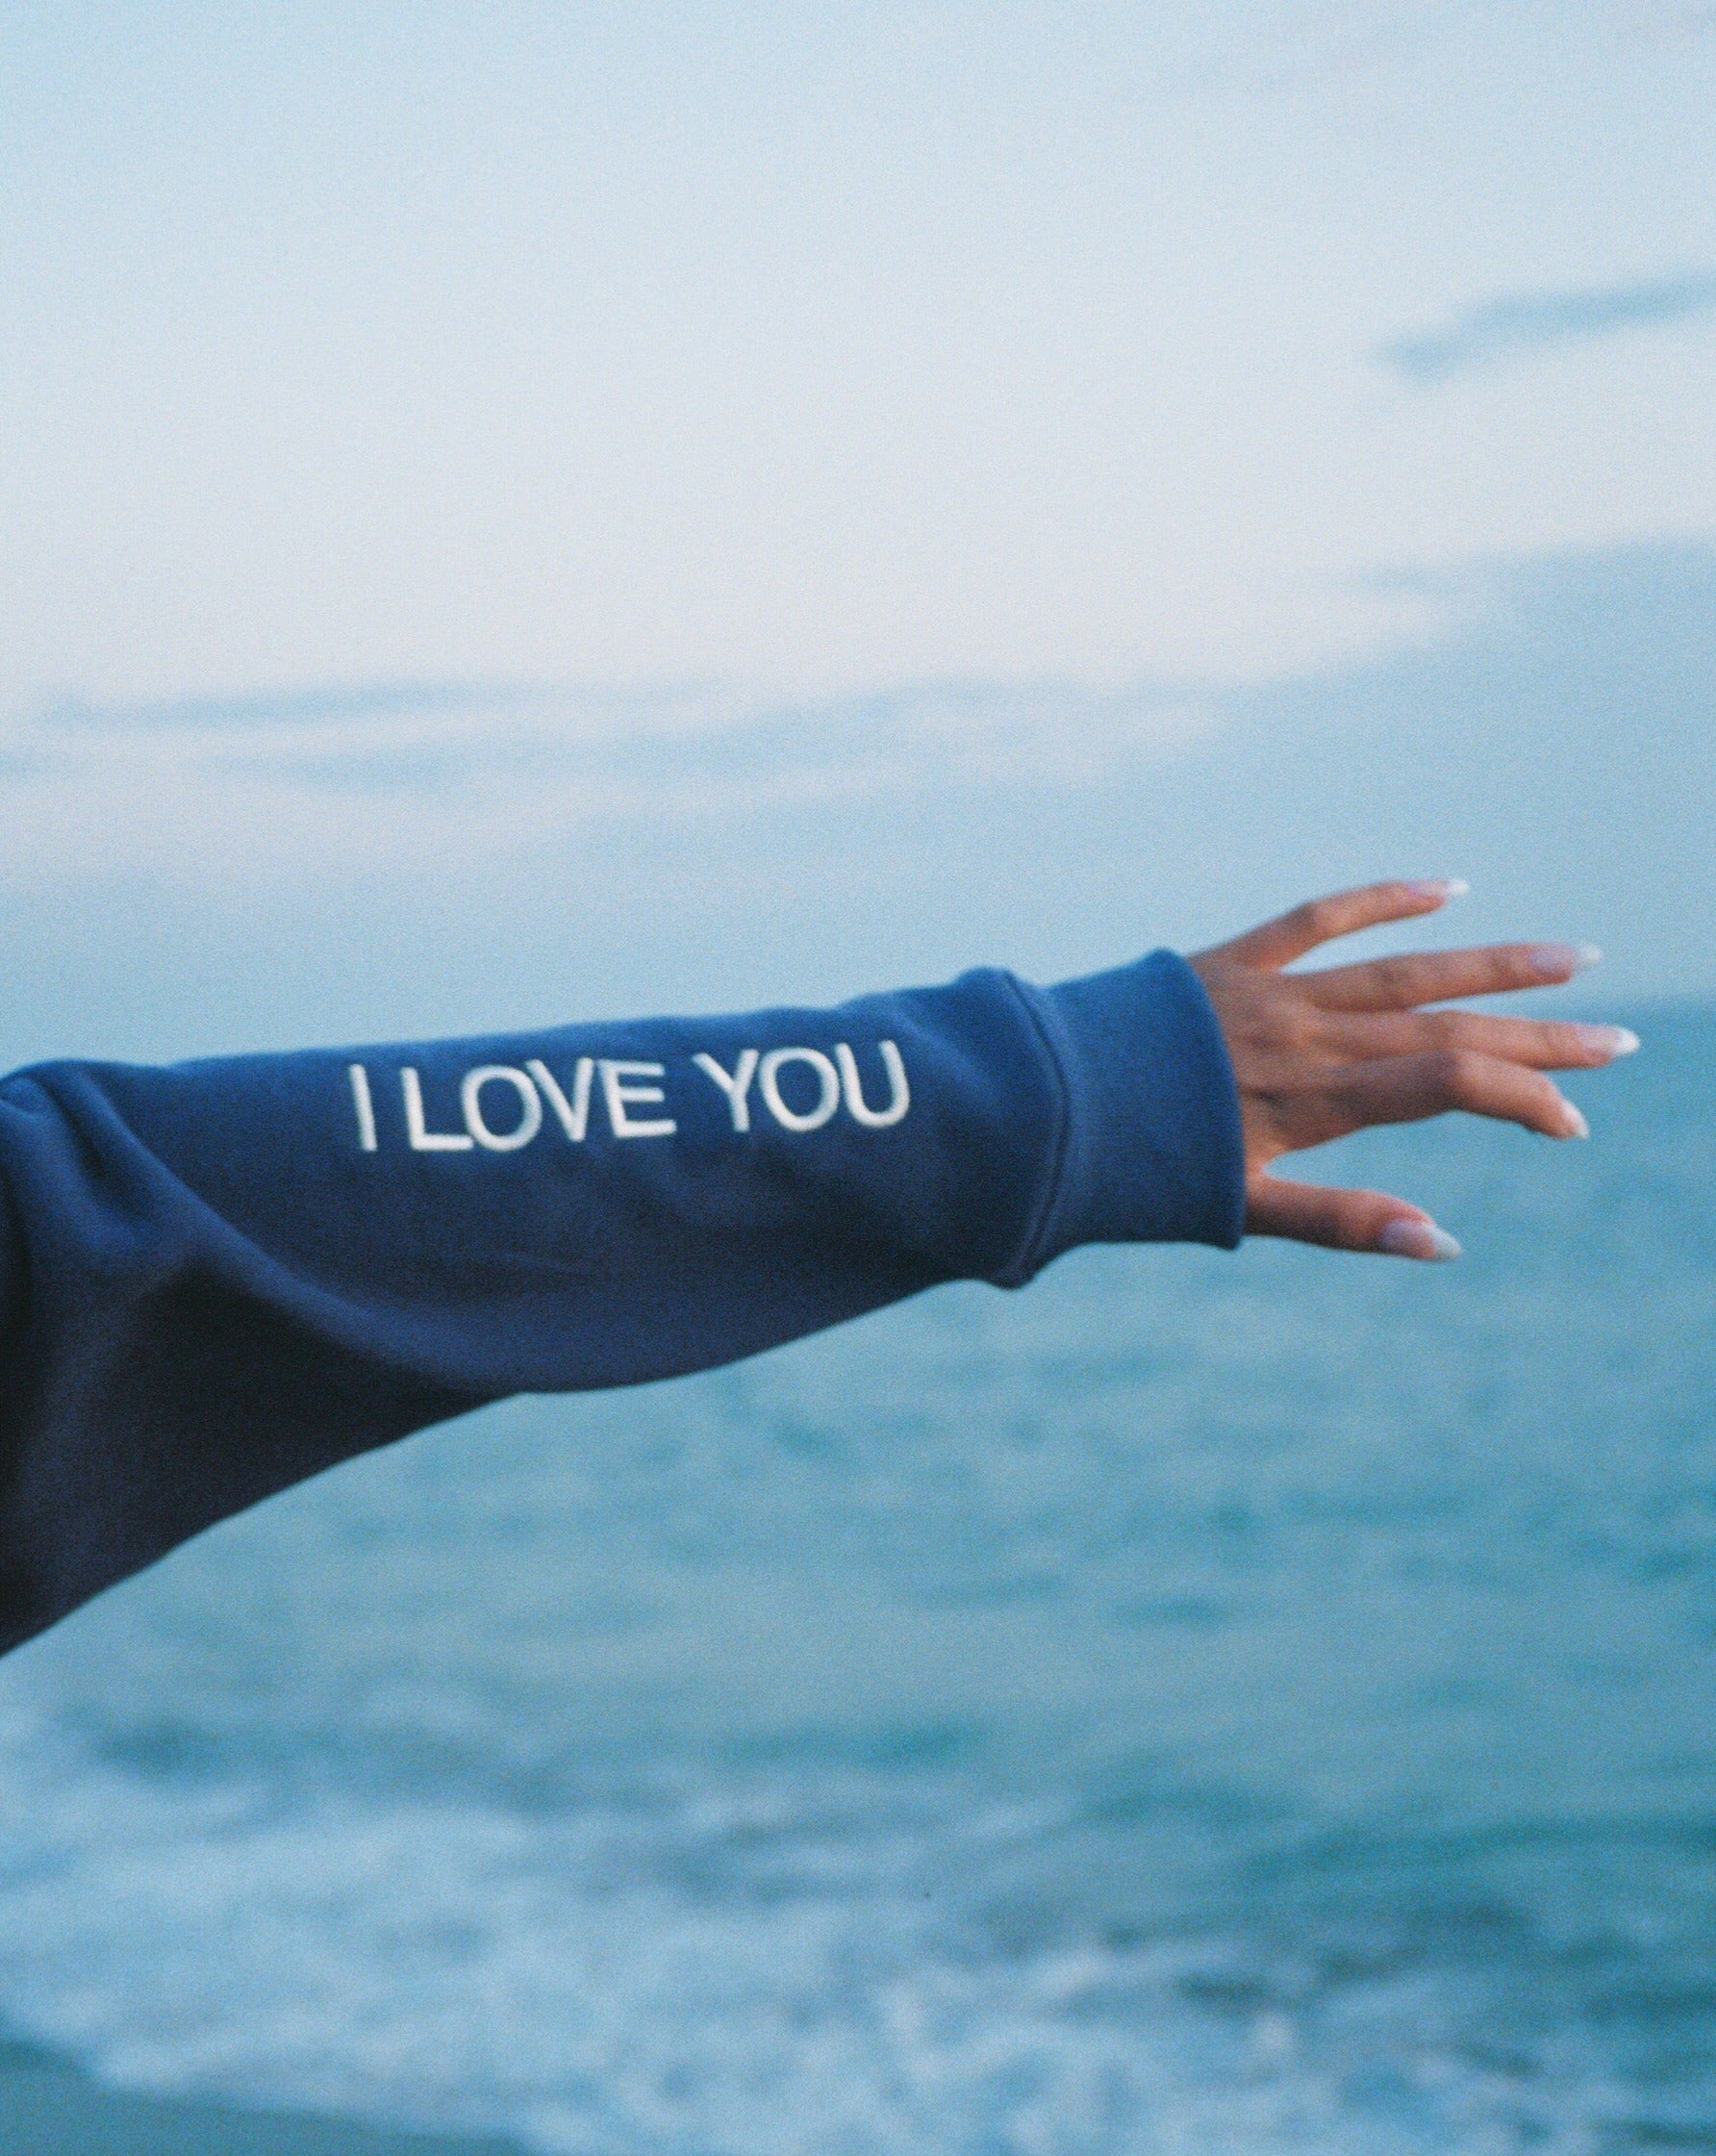 "Words of Affirmation" Oversized Lux Hoodie in Blue